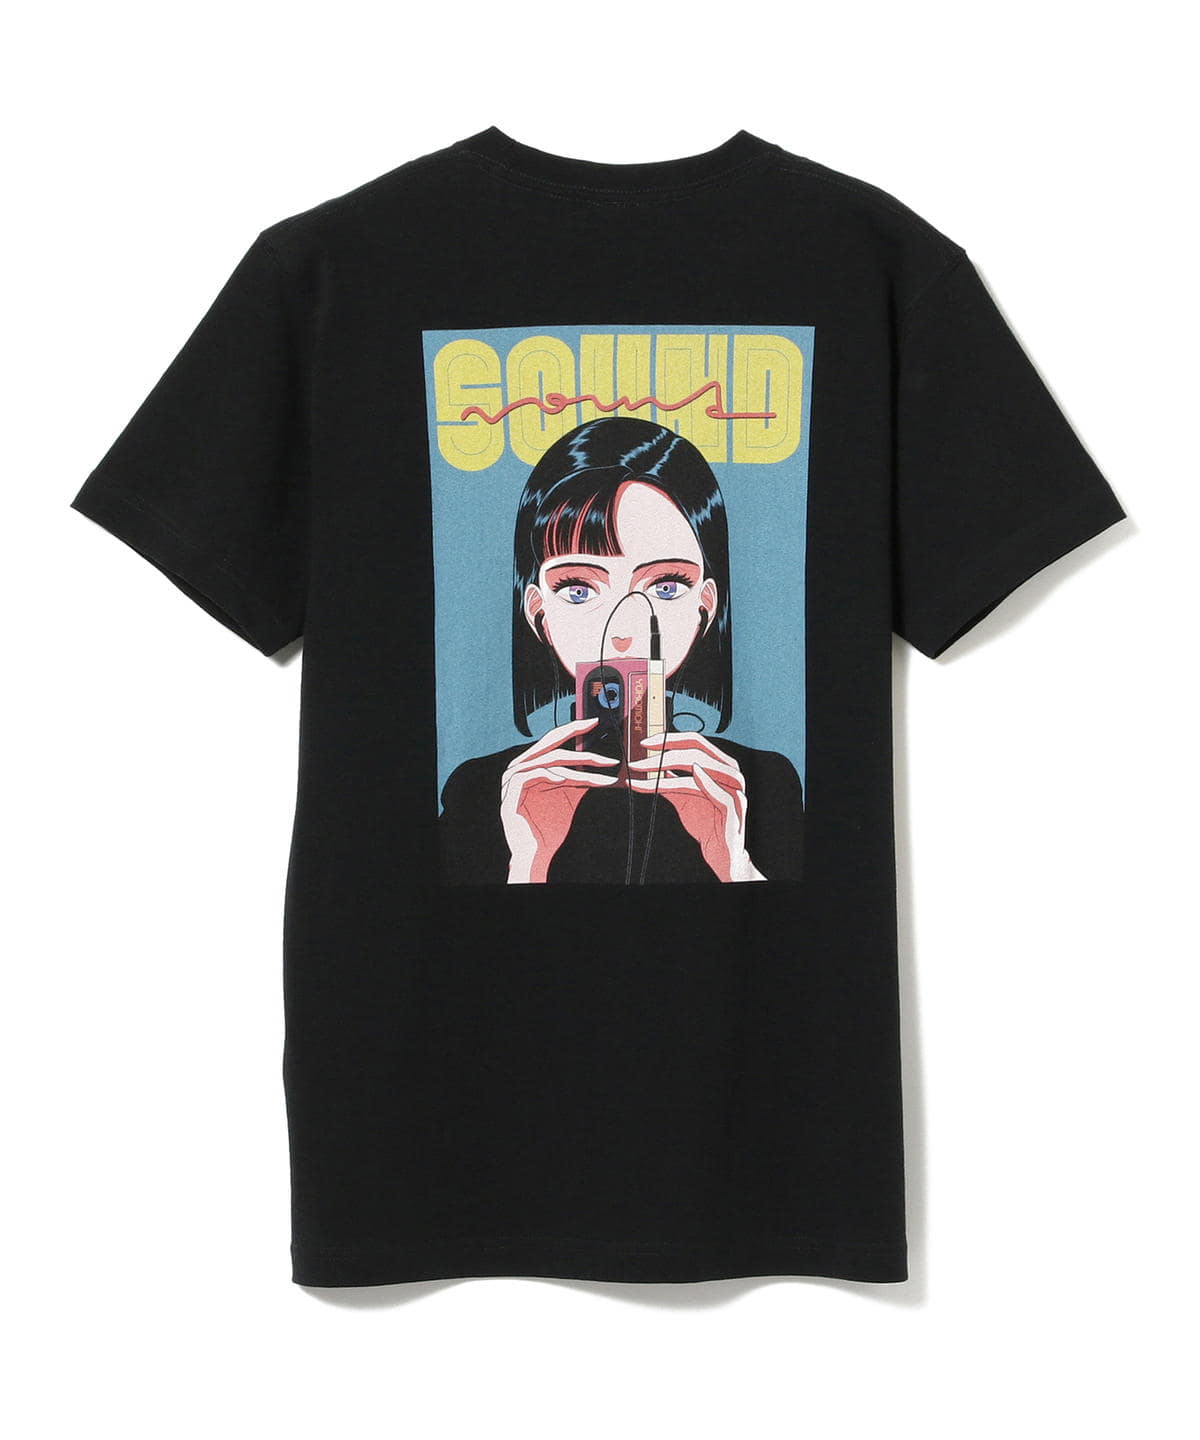 Tokyo Cultuart By Beams トーキョー カルチャート By ビームス Tree13 Sound Image Tシャツ Tシャツ カットソー Tシャツ 通販 Beams